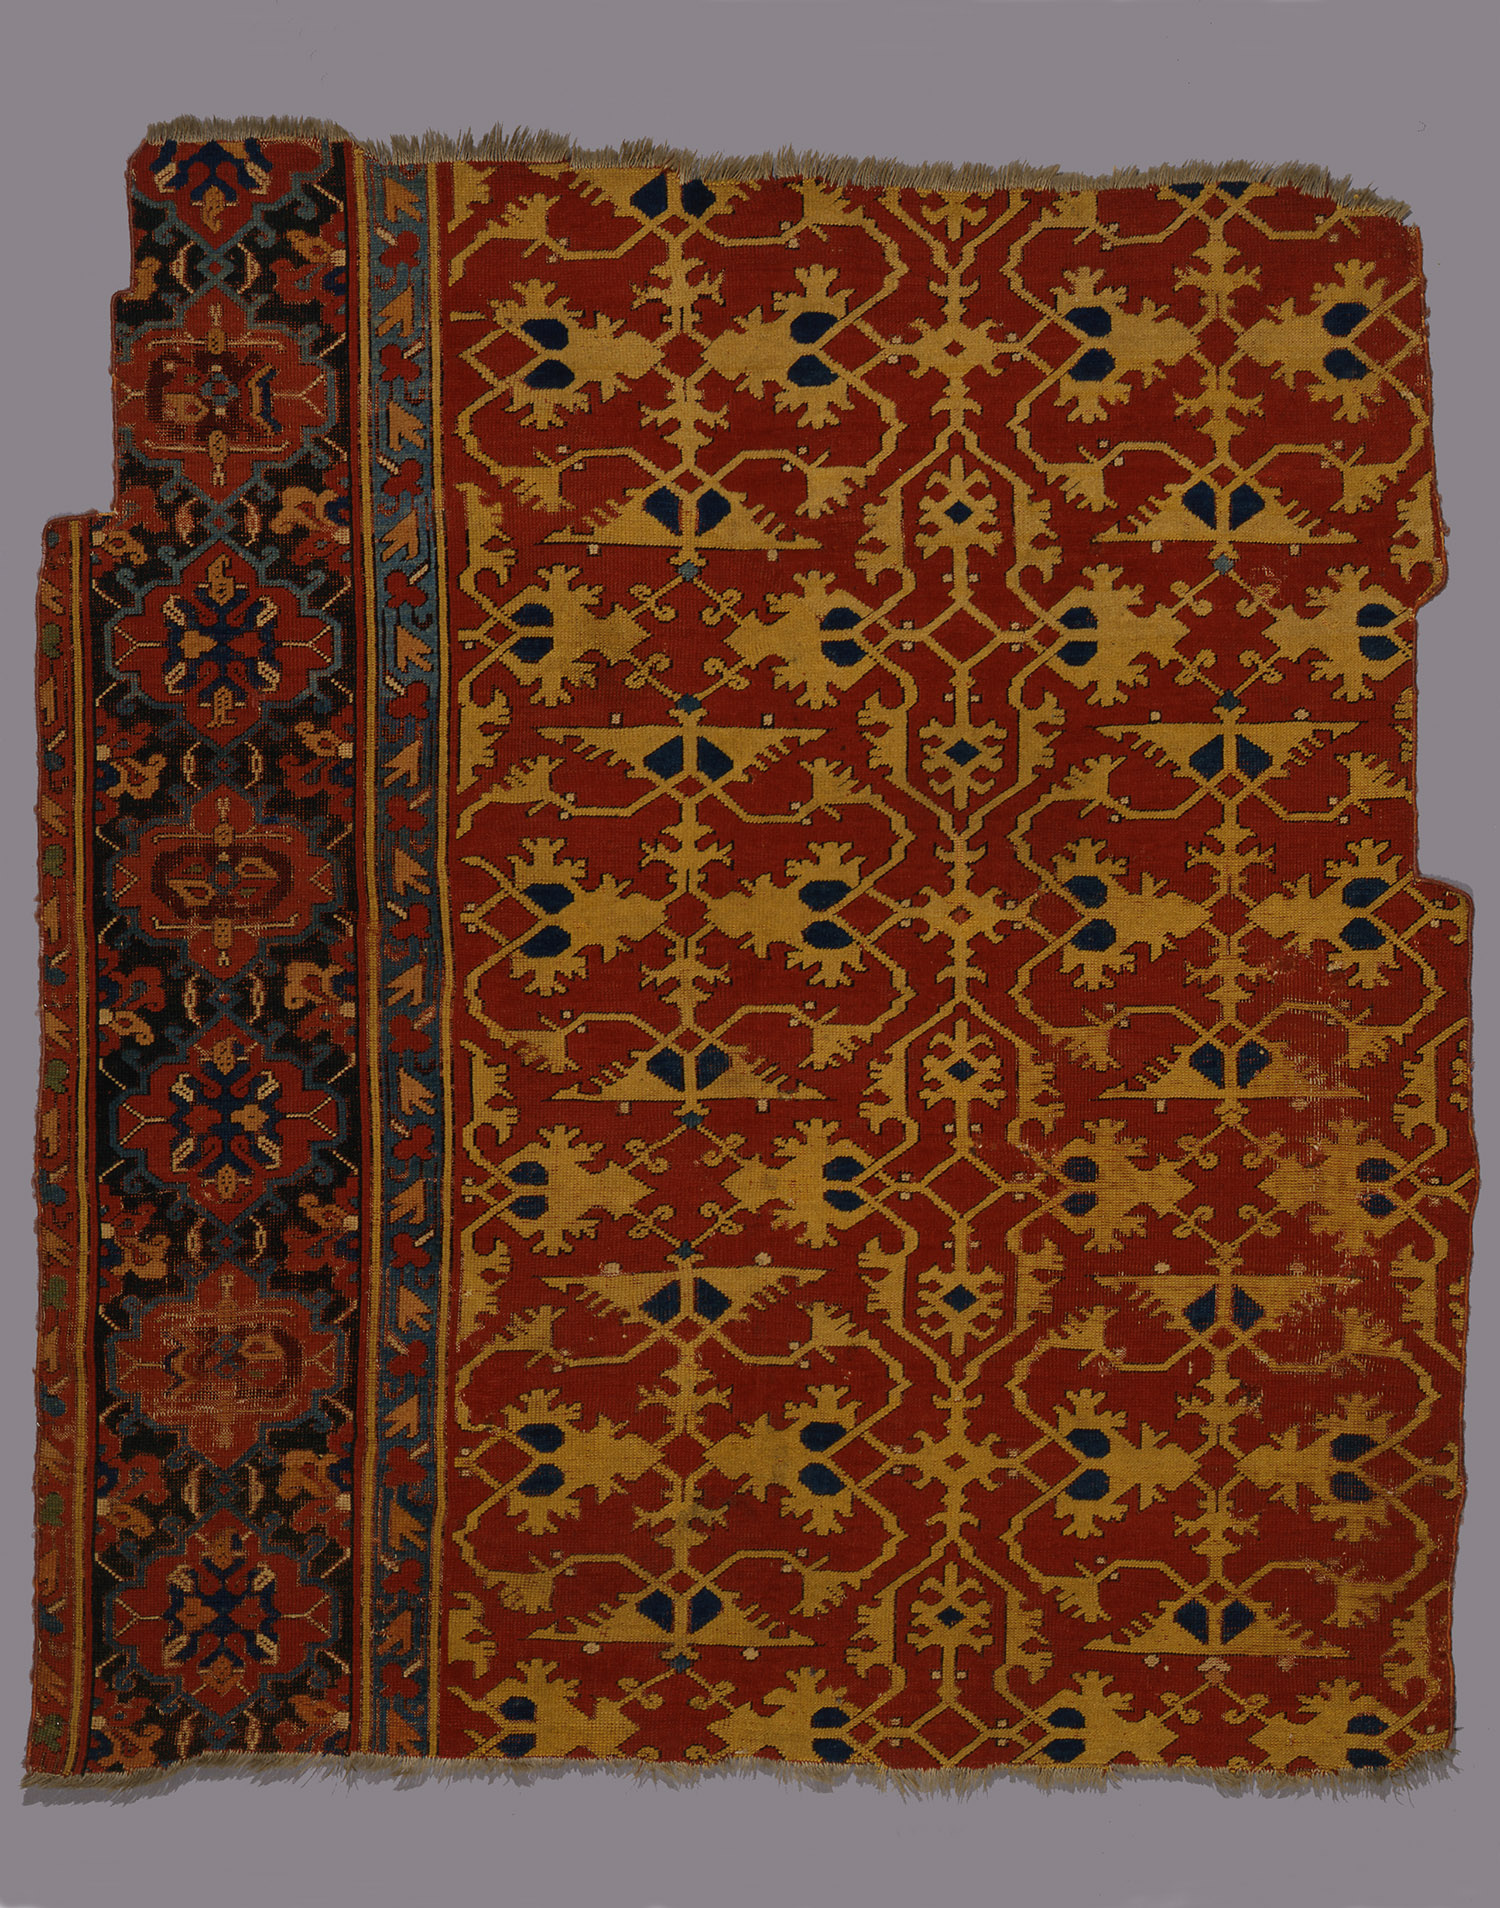 Fragment of a Lotto carpet. Photograph courtesy of the Textile Museum and the George Washington University Museum.